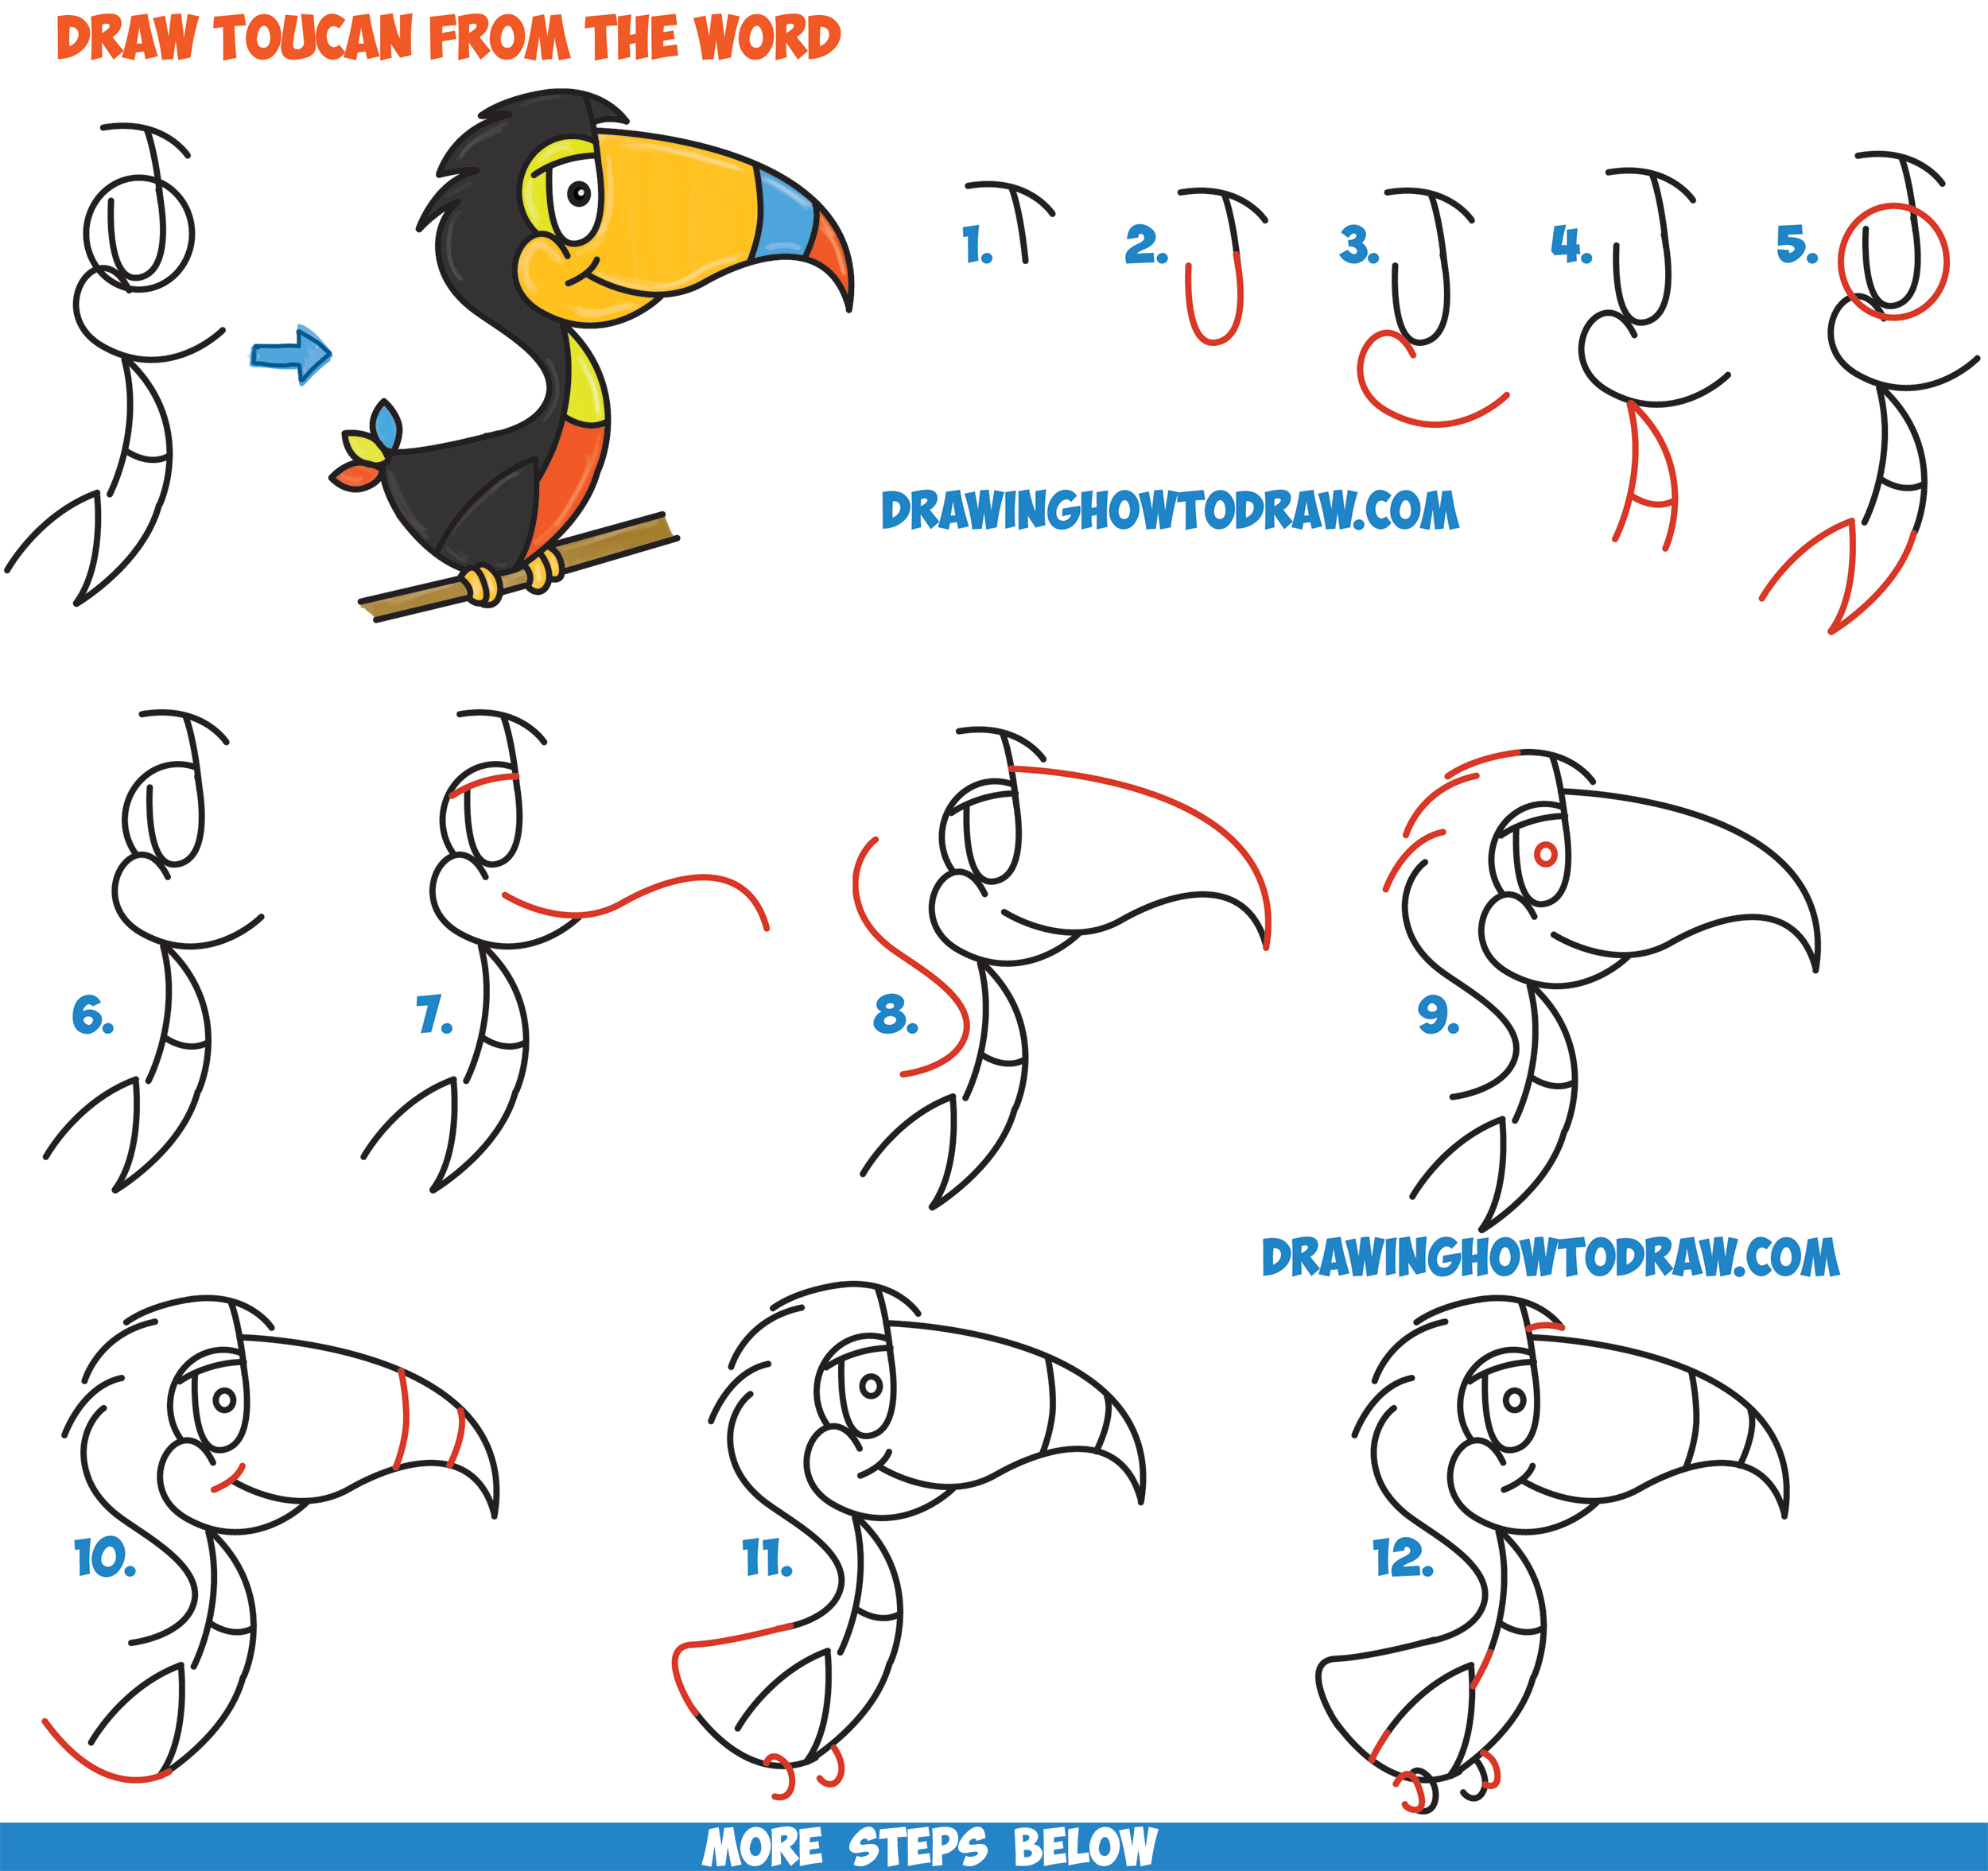 How to Draw Cartoon Toucans from the Word - Easy Step by Step Drawing Tutorial for Kids (Word Toons / Cartoons)